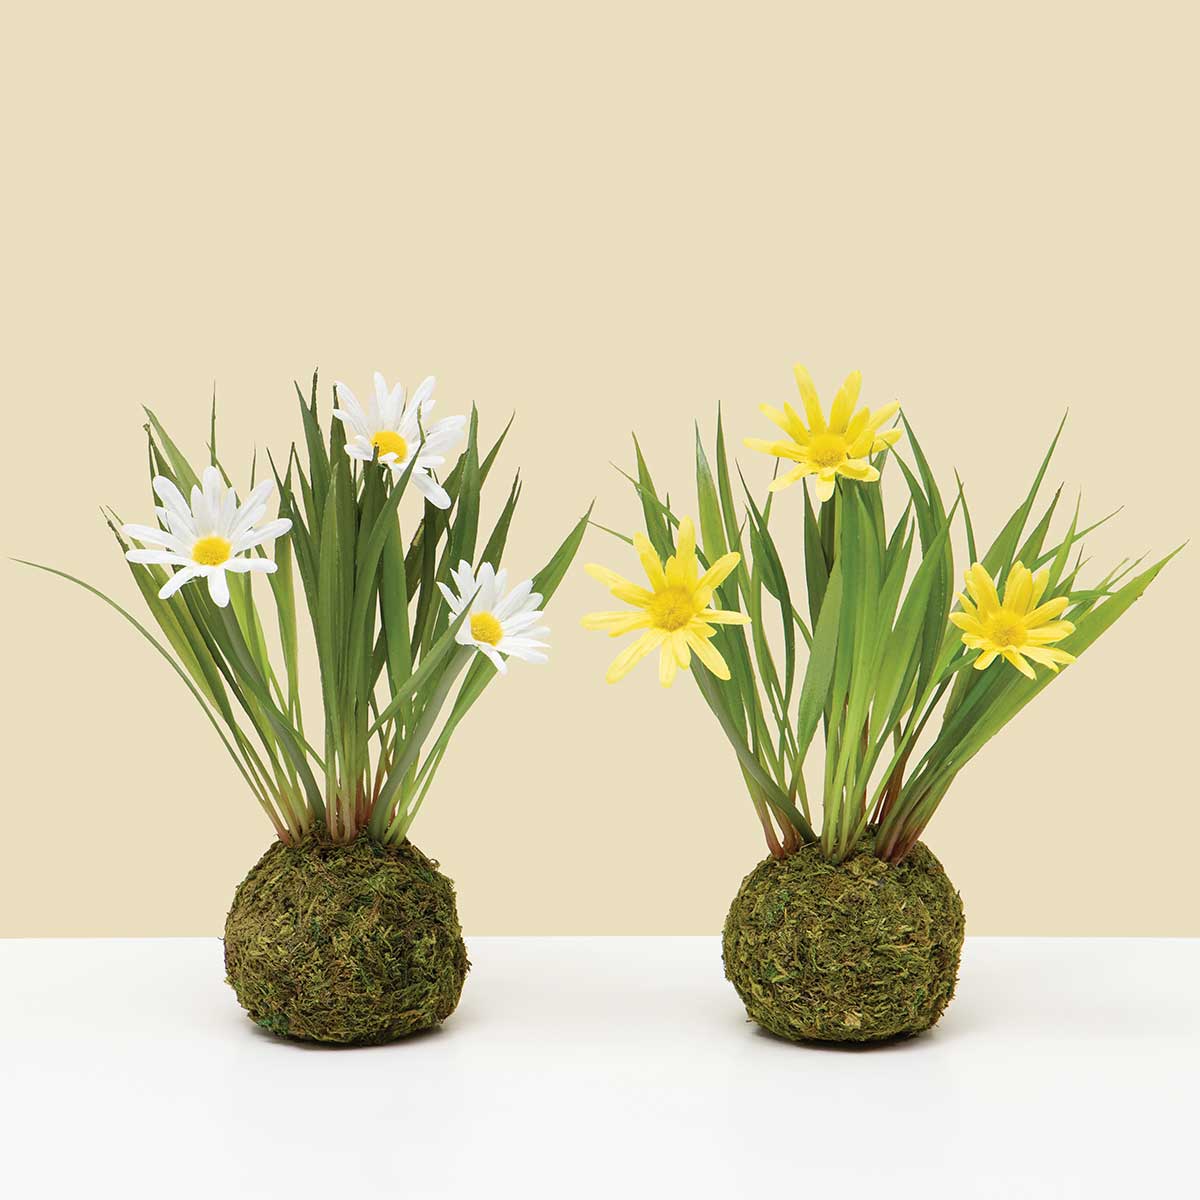 MINI DAISY X3 AND GRASS WITH FAUX DIRT/MOSS 6"x8" WHITE